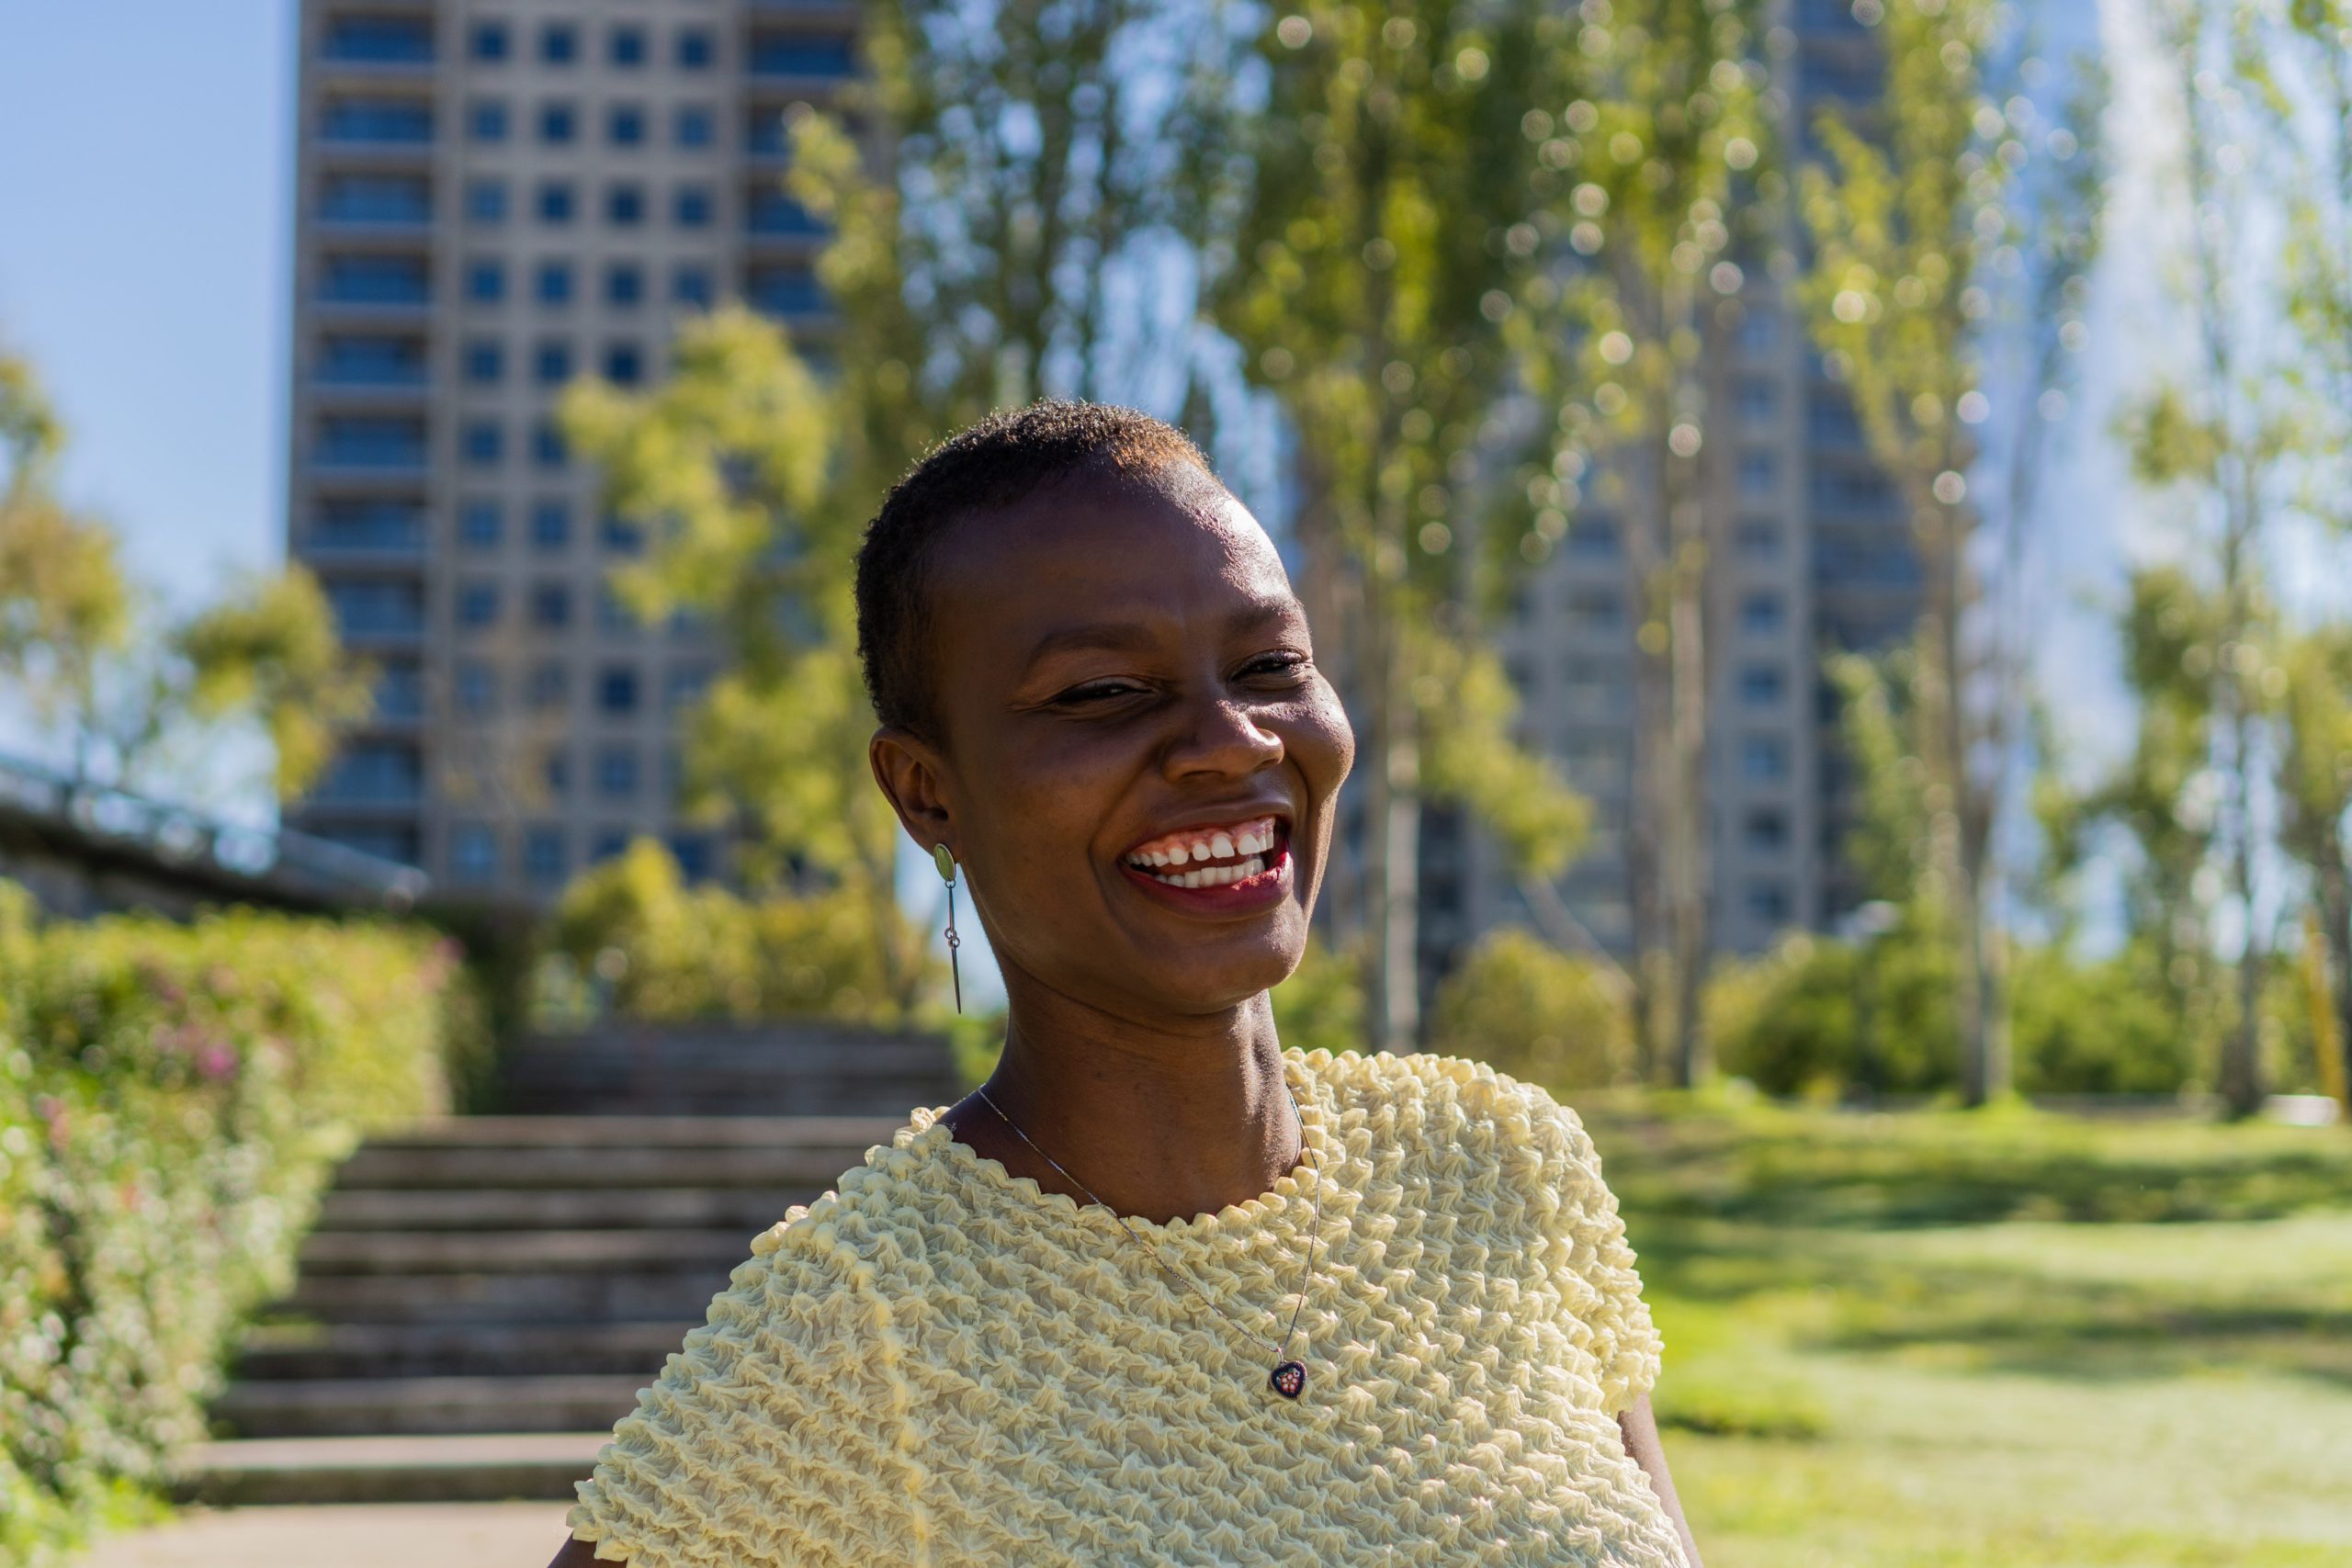 Portrait of a young Afro-American woman laughing looking at the camera standing in nature